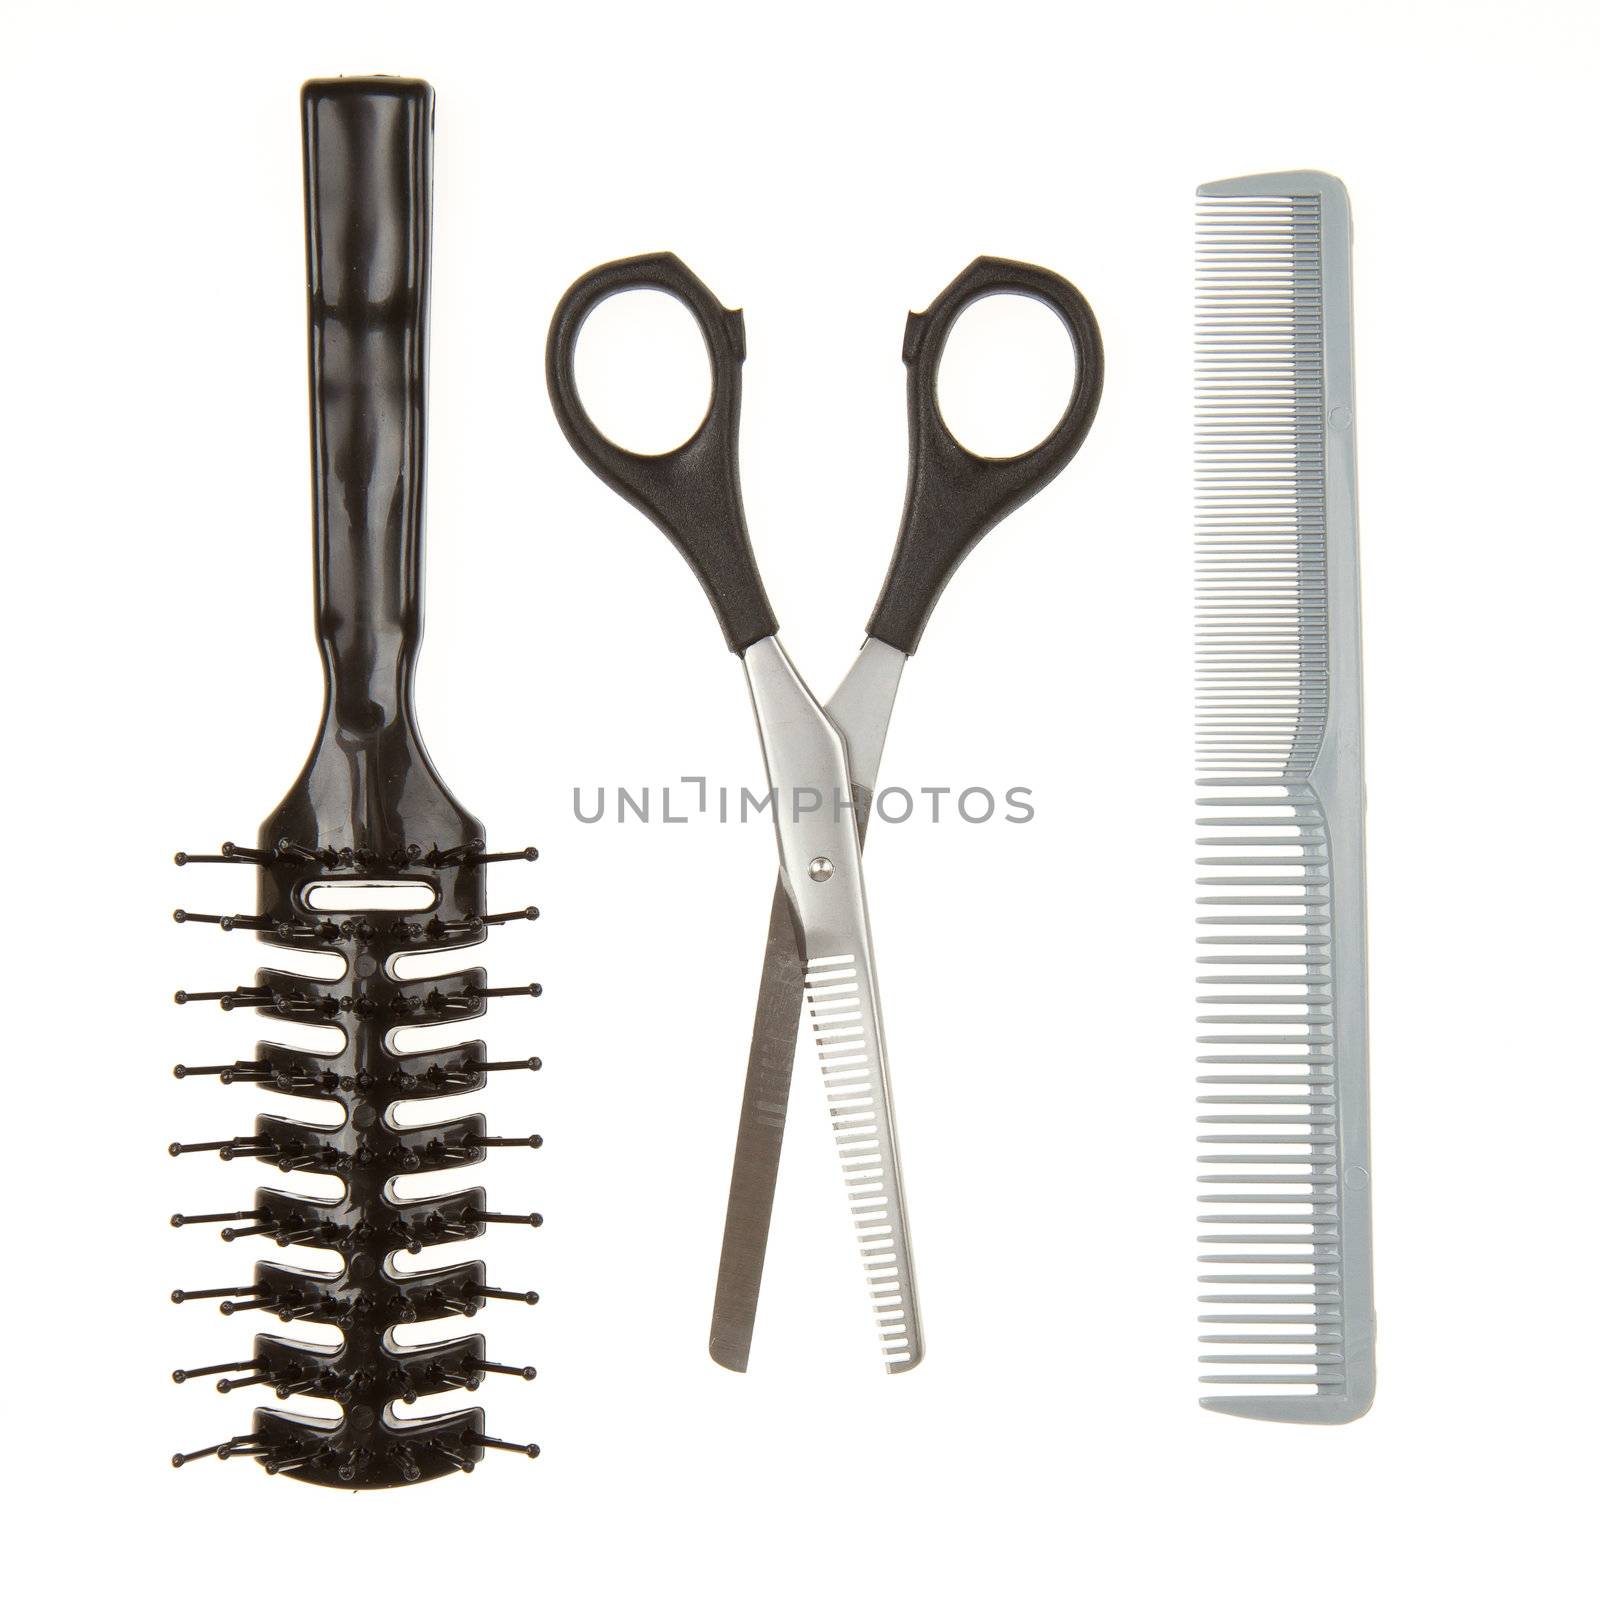 Close up of shiny silver hair cutting scissors or shears and black comb and a black brush isolated on white background